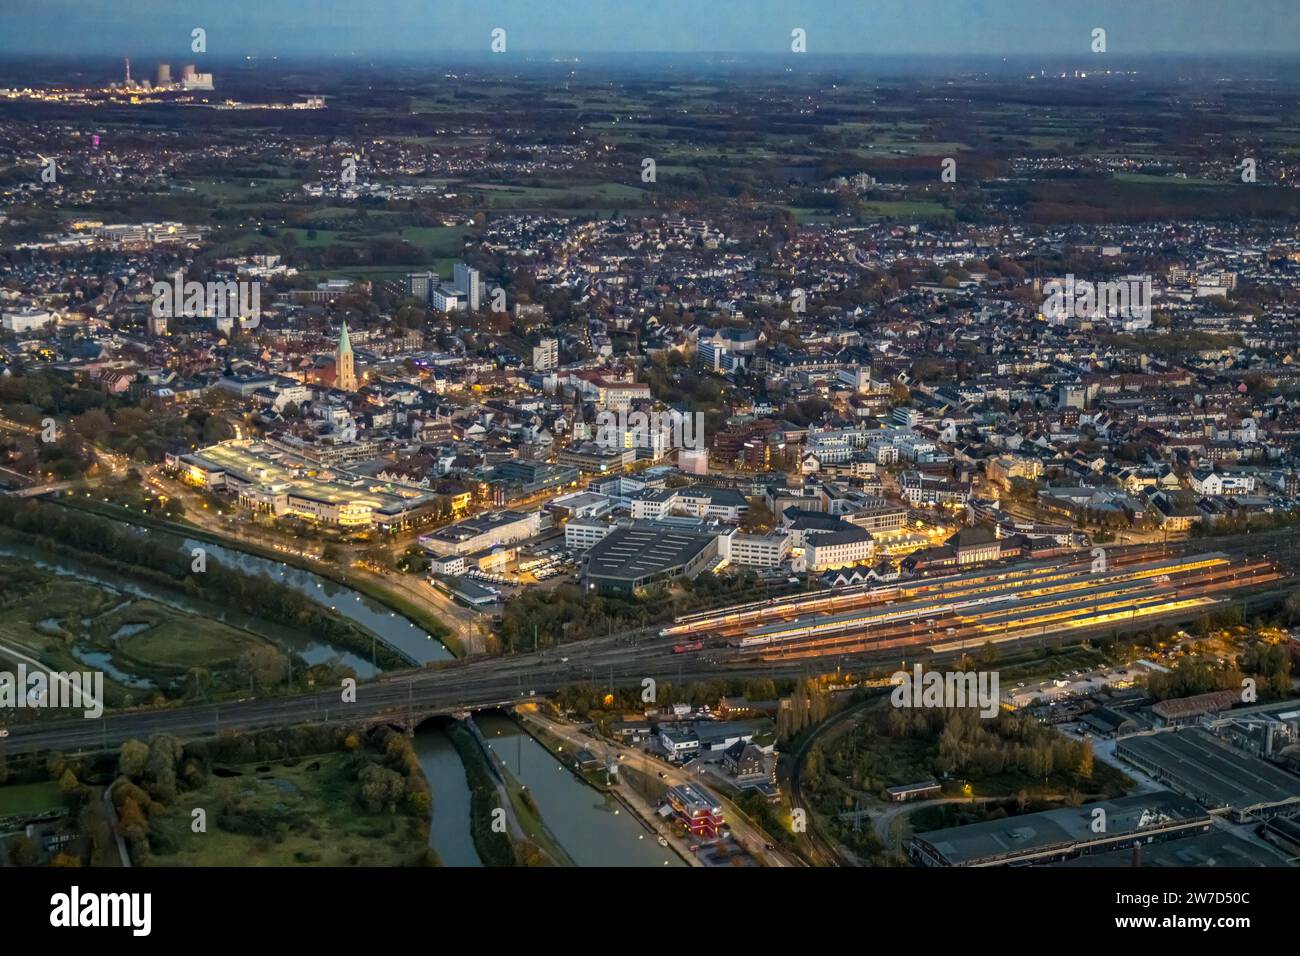 Aerial view, night view, central station and city with Allee Center and distant view, center, Hamm, Ruhr area, North Rhine-Westphalia, Germany, Allee- Stock Photo